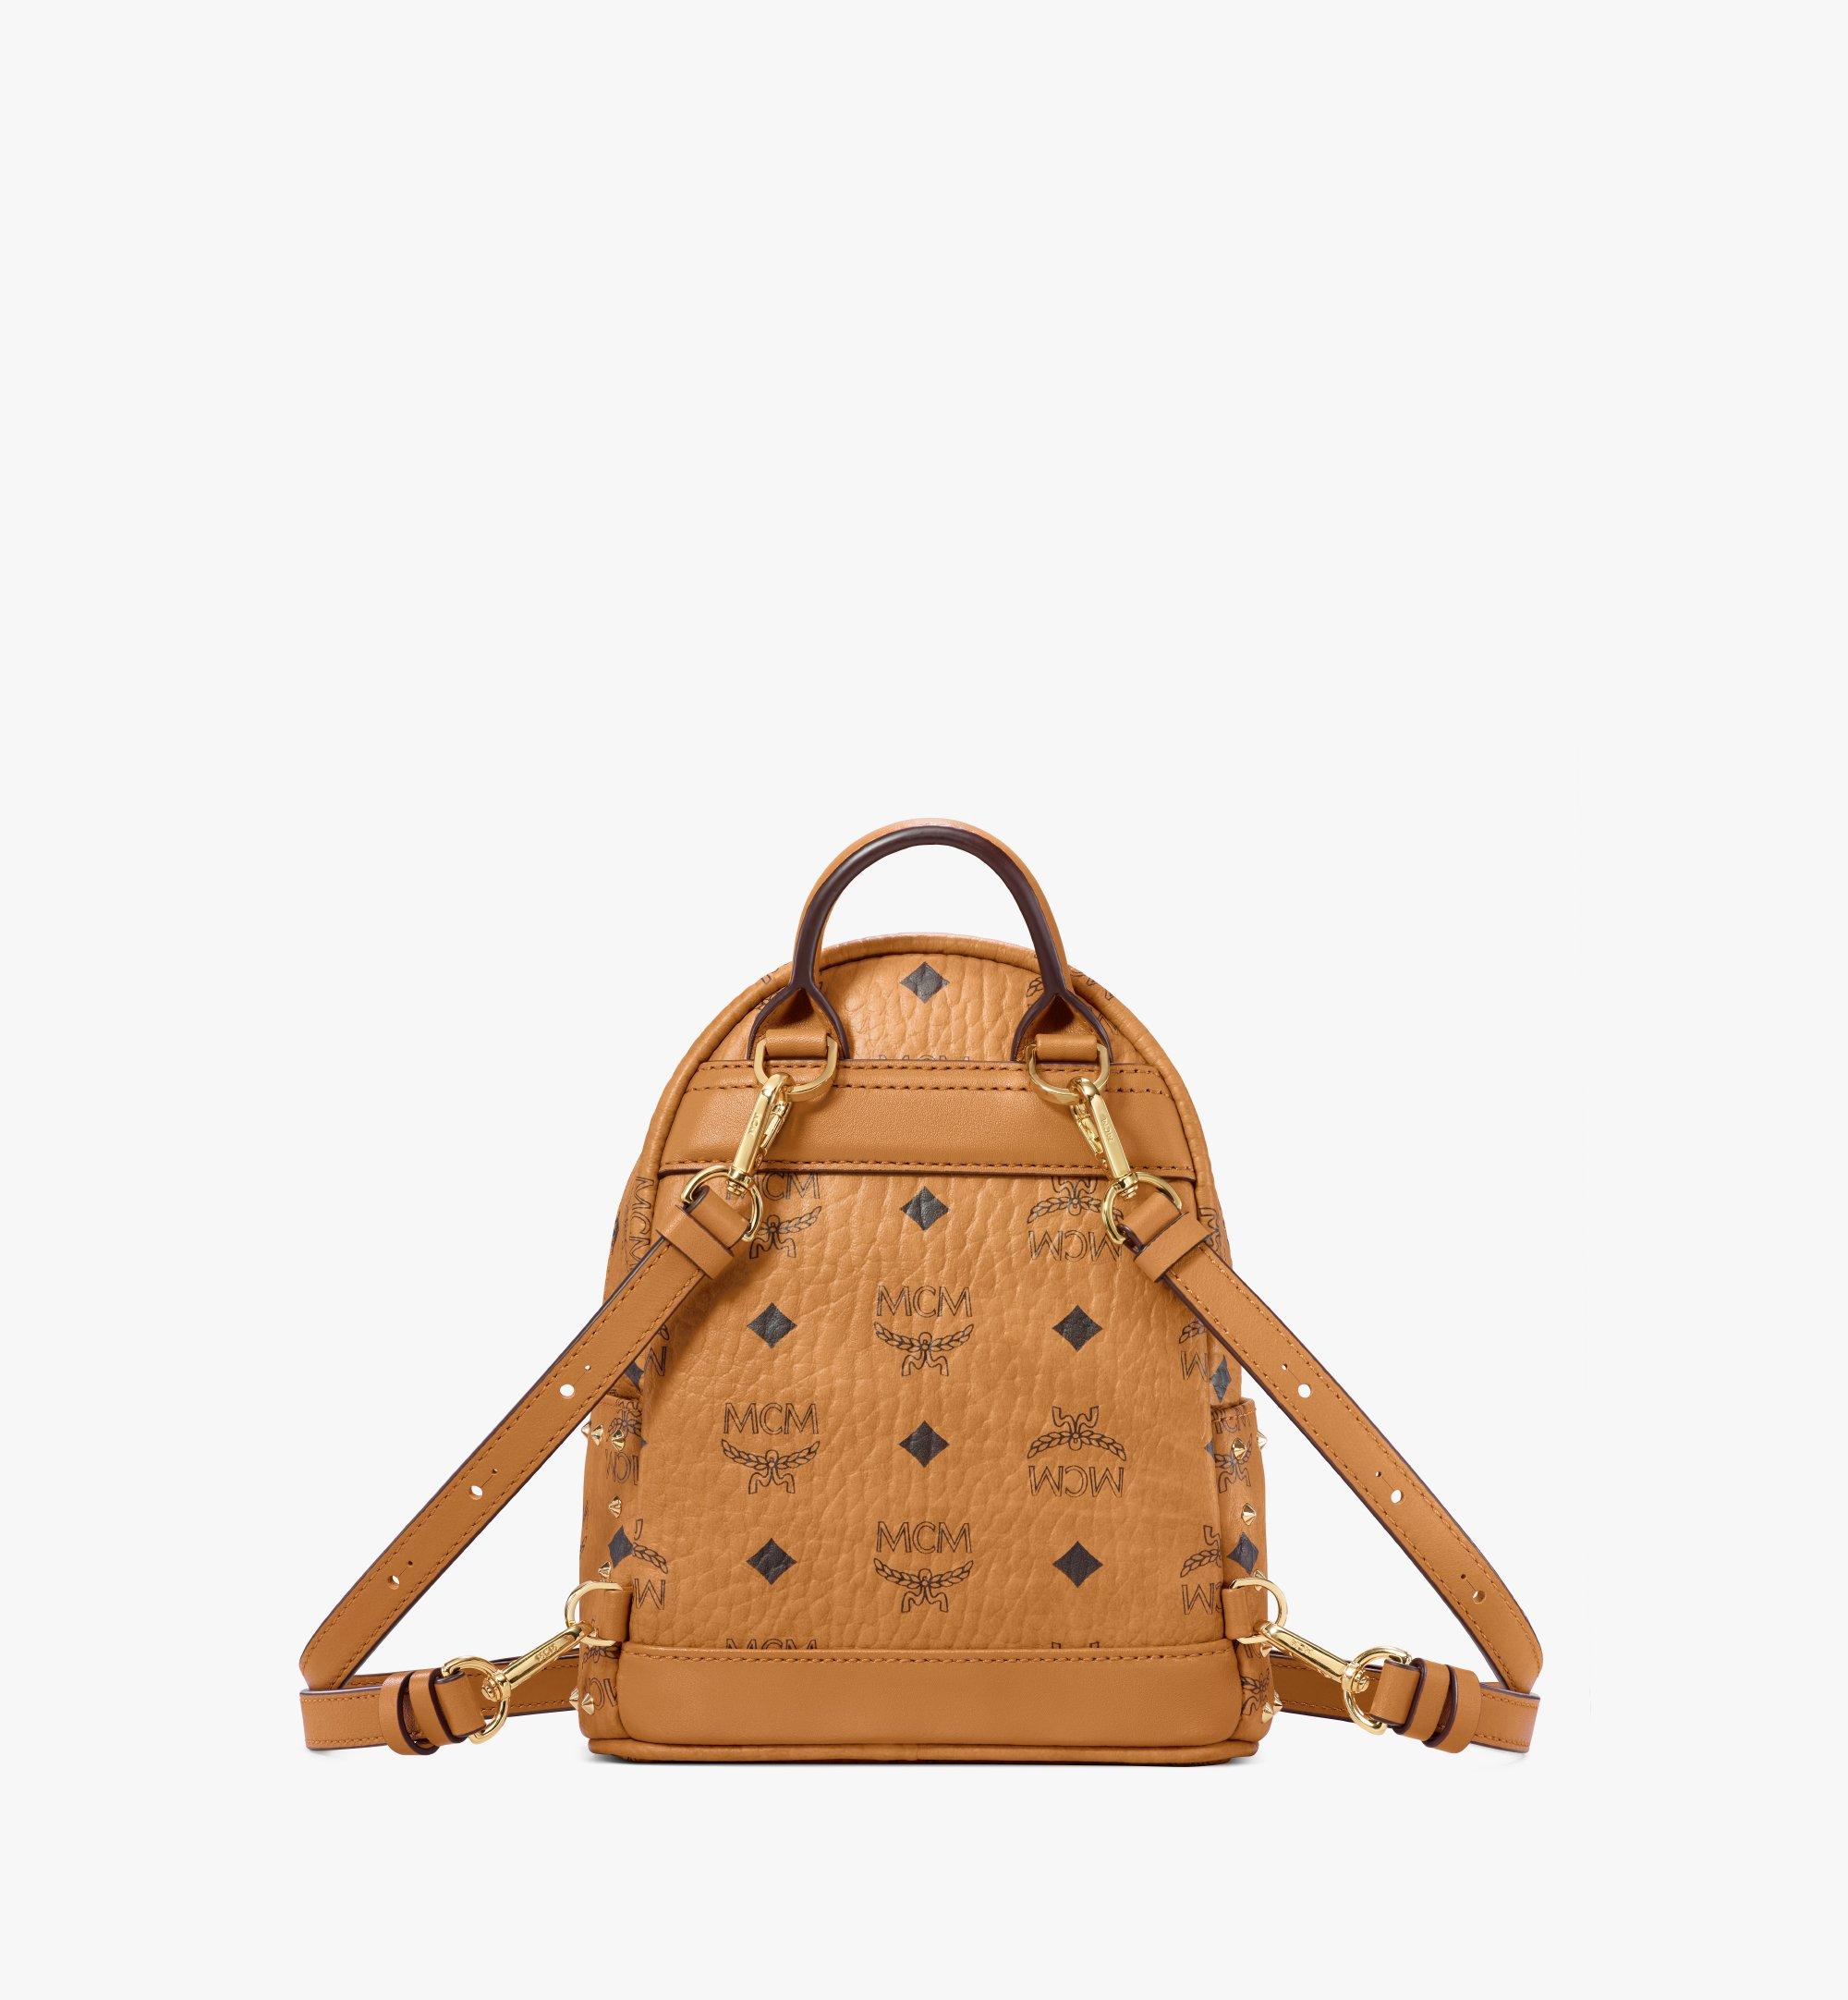 MCM Stark Bebe Boo Backpack in Studded Outline Visetos Cognac MMKAAVE05CO001 Alternate View 3